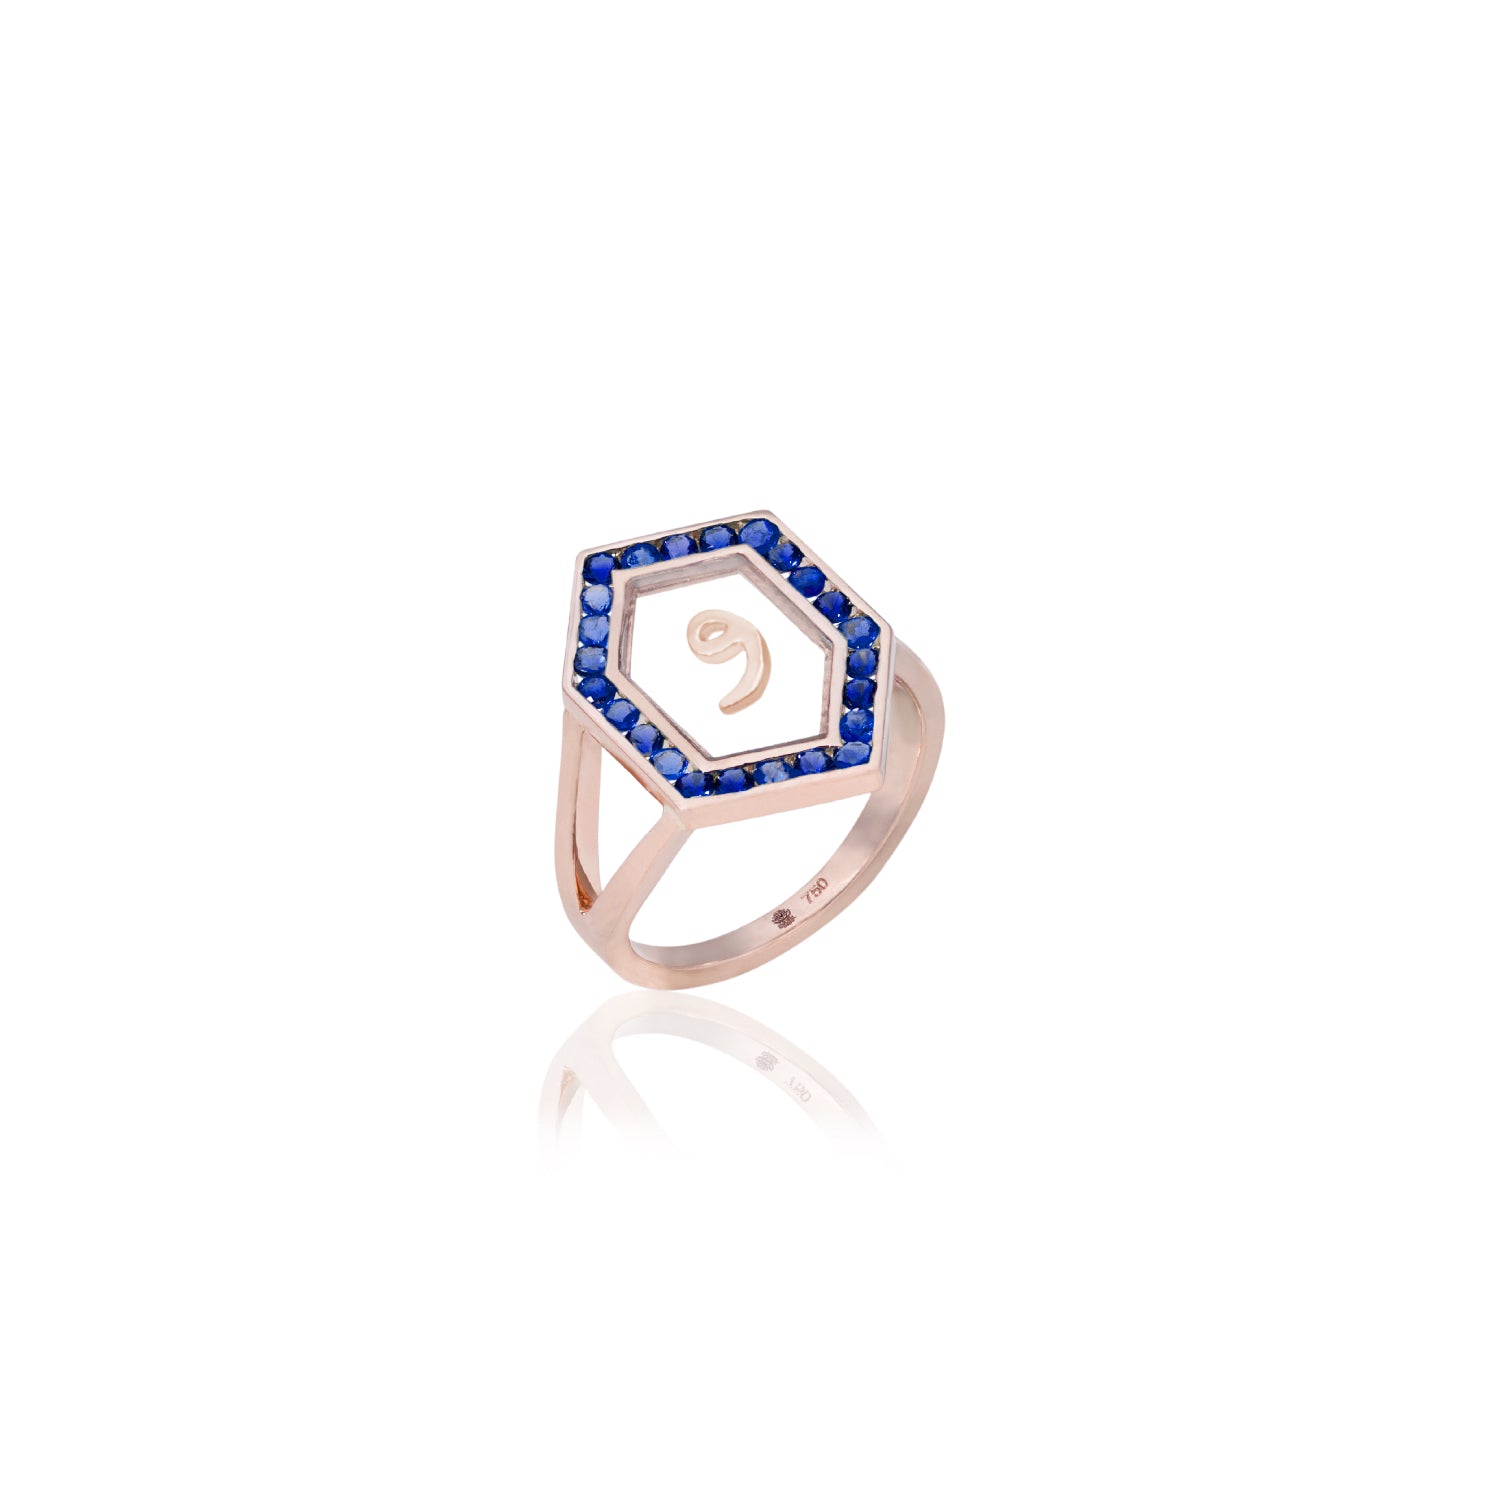 Qamoos 1.0 Letter و Sapphire Ring in Rose Gold